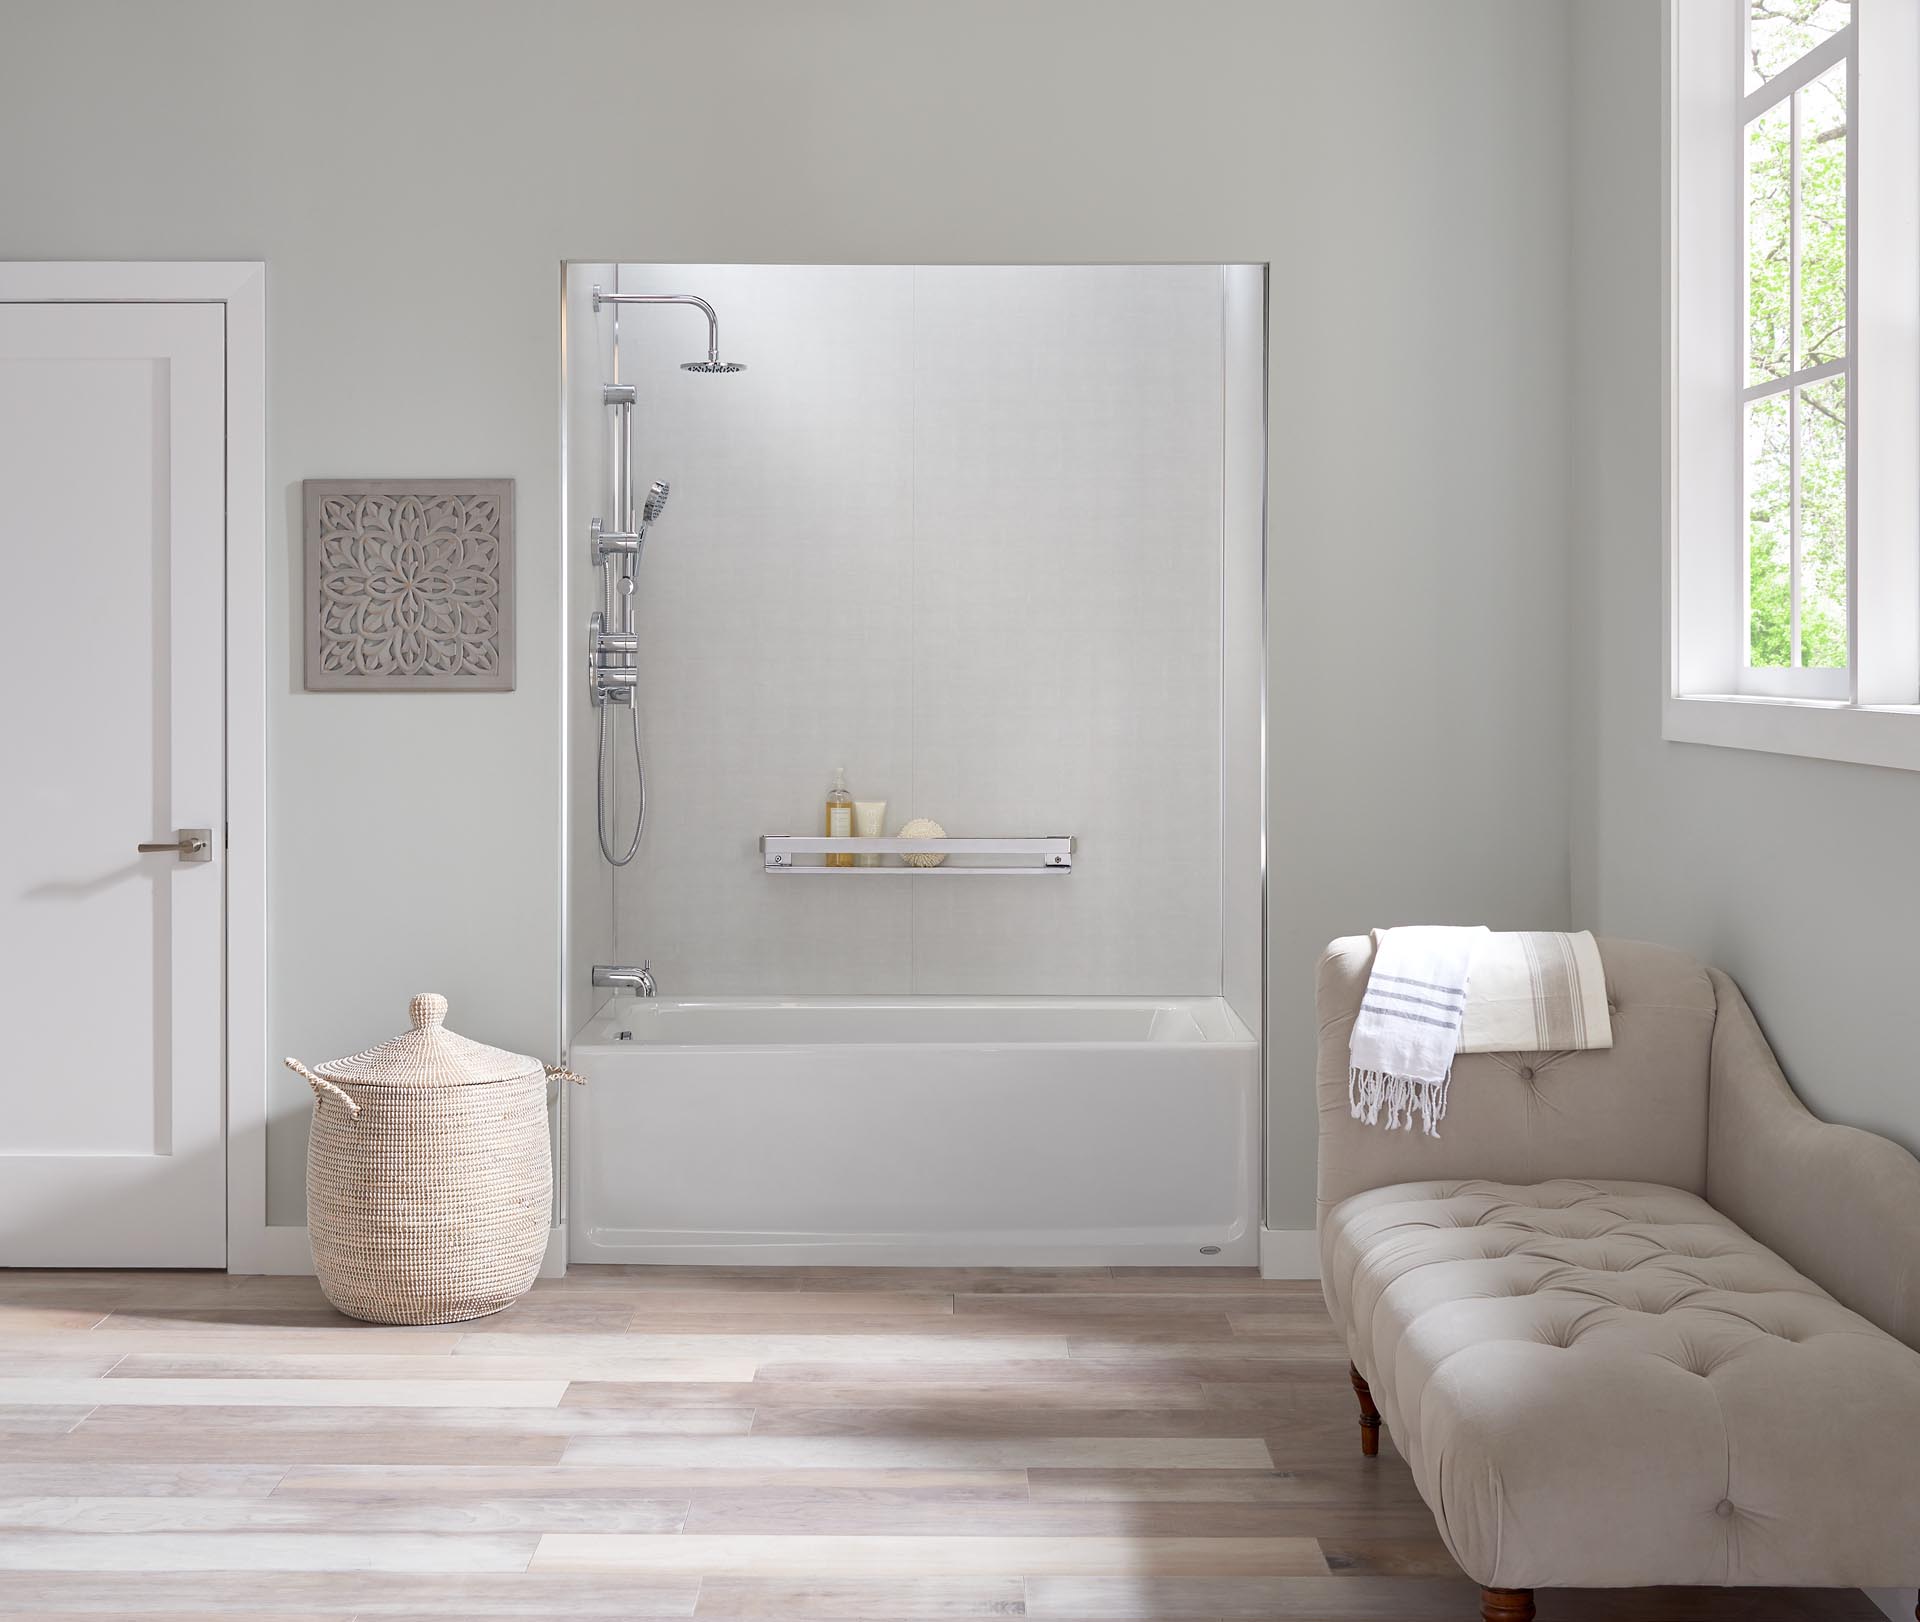 A beautiful bathroom with a light gray fainting sofa and a shower and bathtub combination.